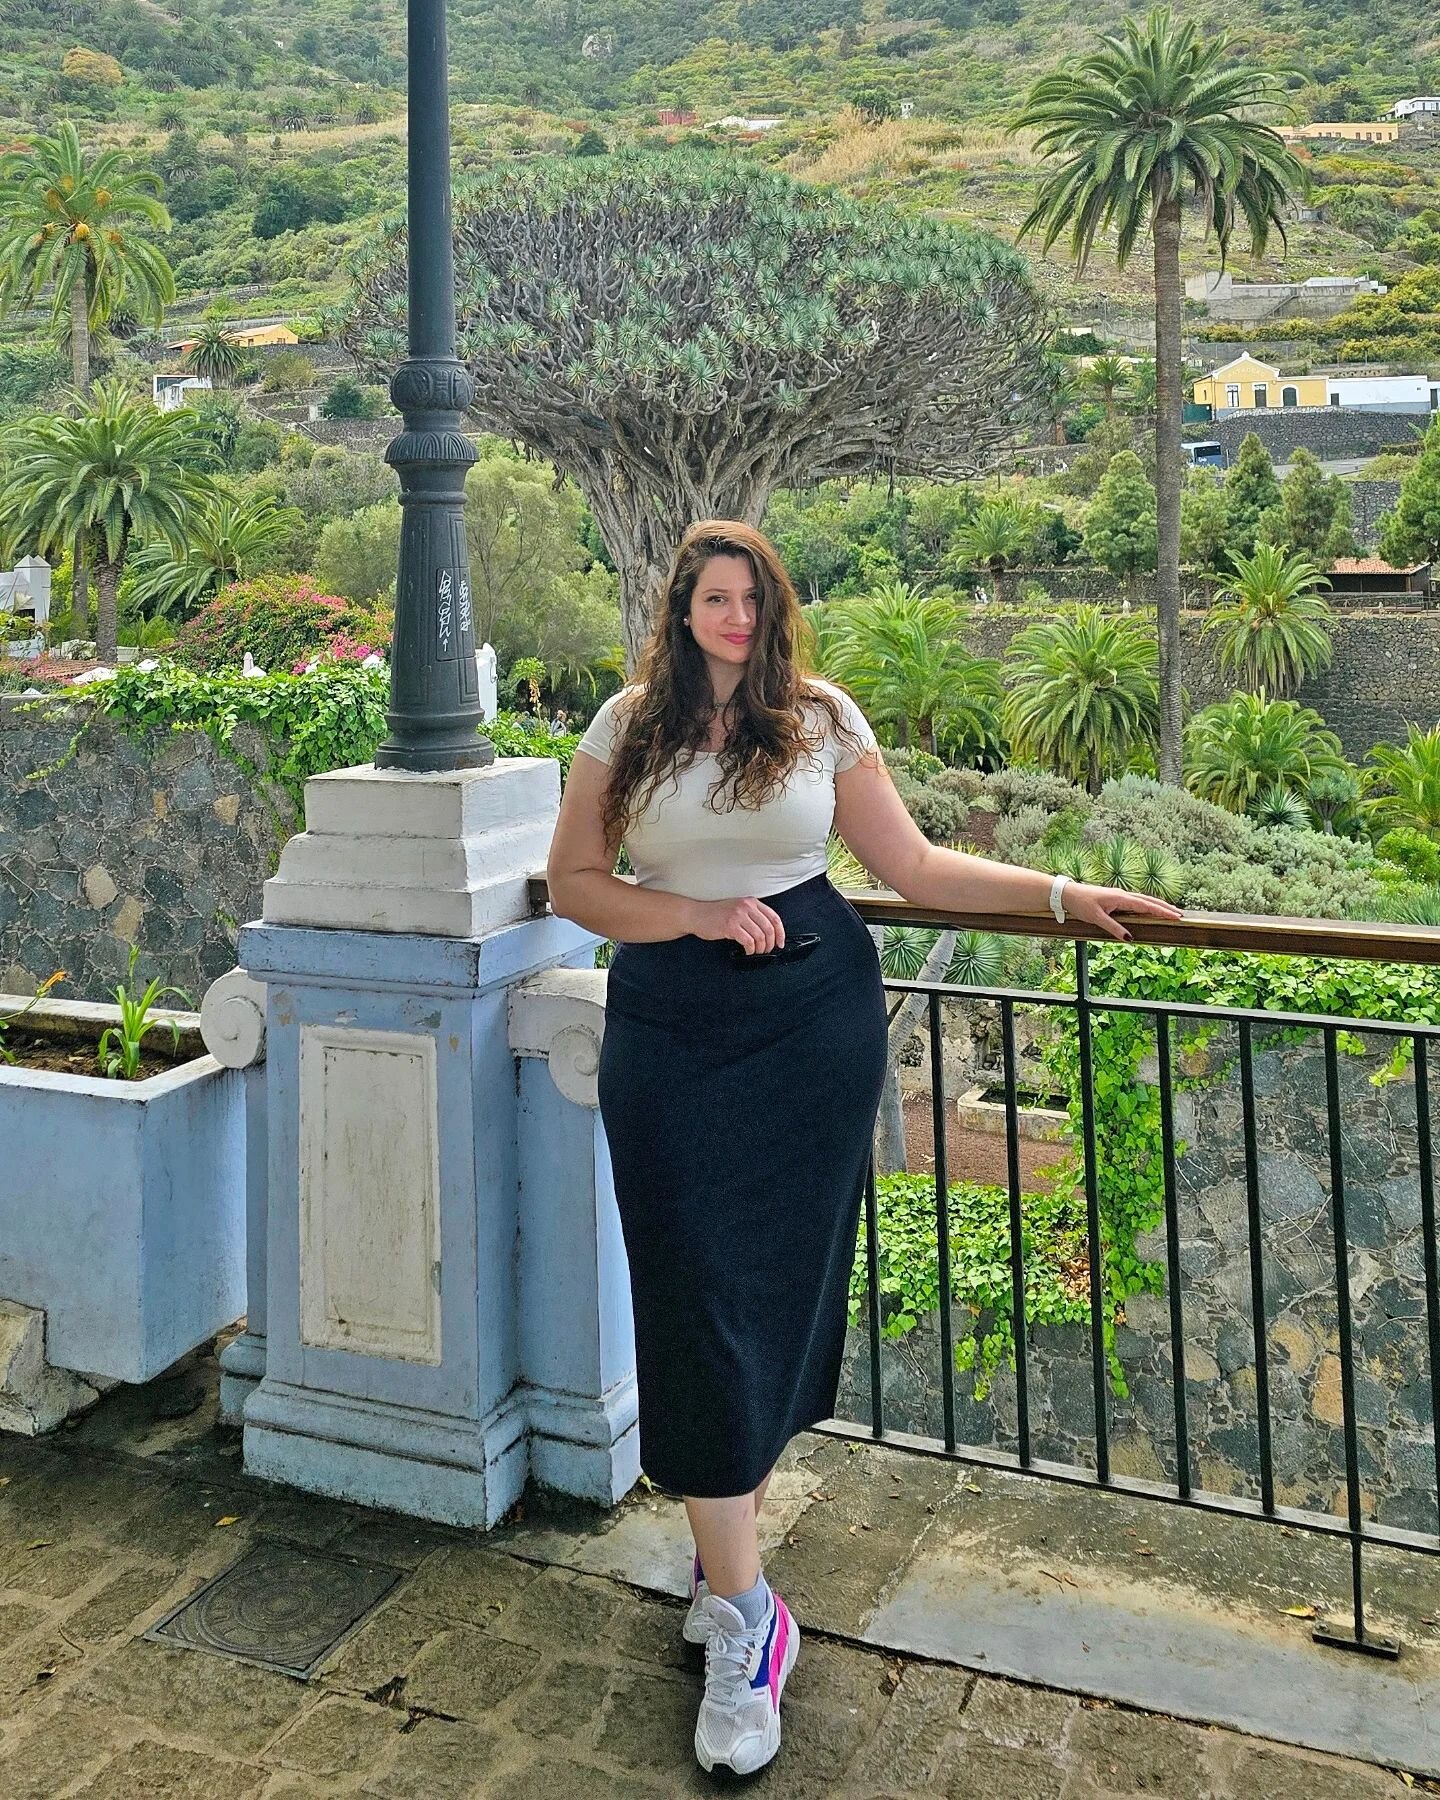 Do you see that mushroom-looking tree behind my head? No you don't, because it's not a tree, it's a plant! Apparently, the Drago plant, when in the right conditions such as those in #Tenerife, can grow to tree-like sizes over hundreds of years... Thi